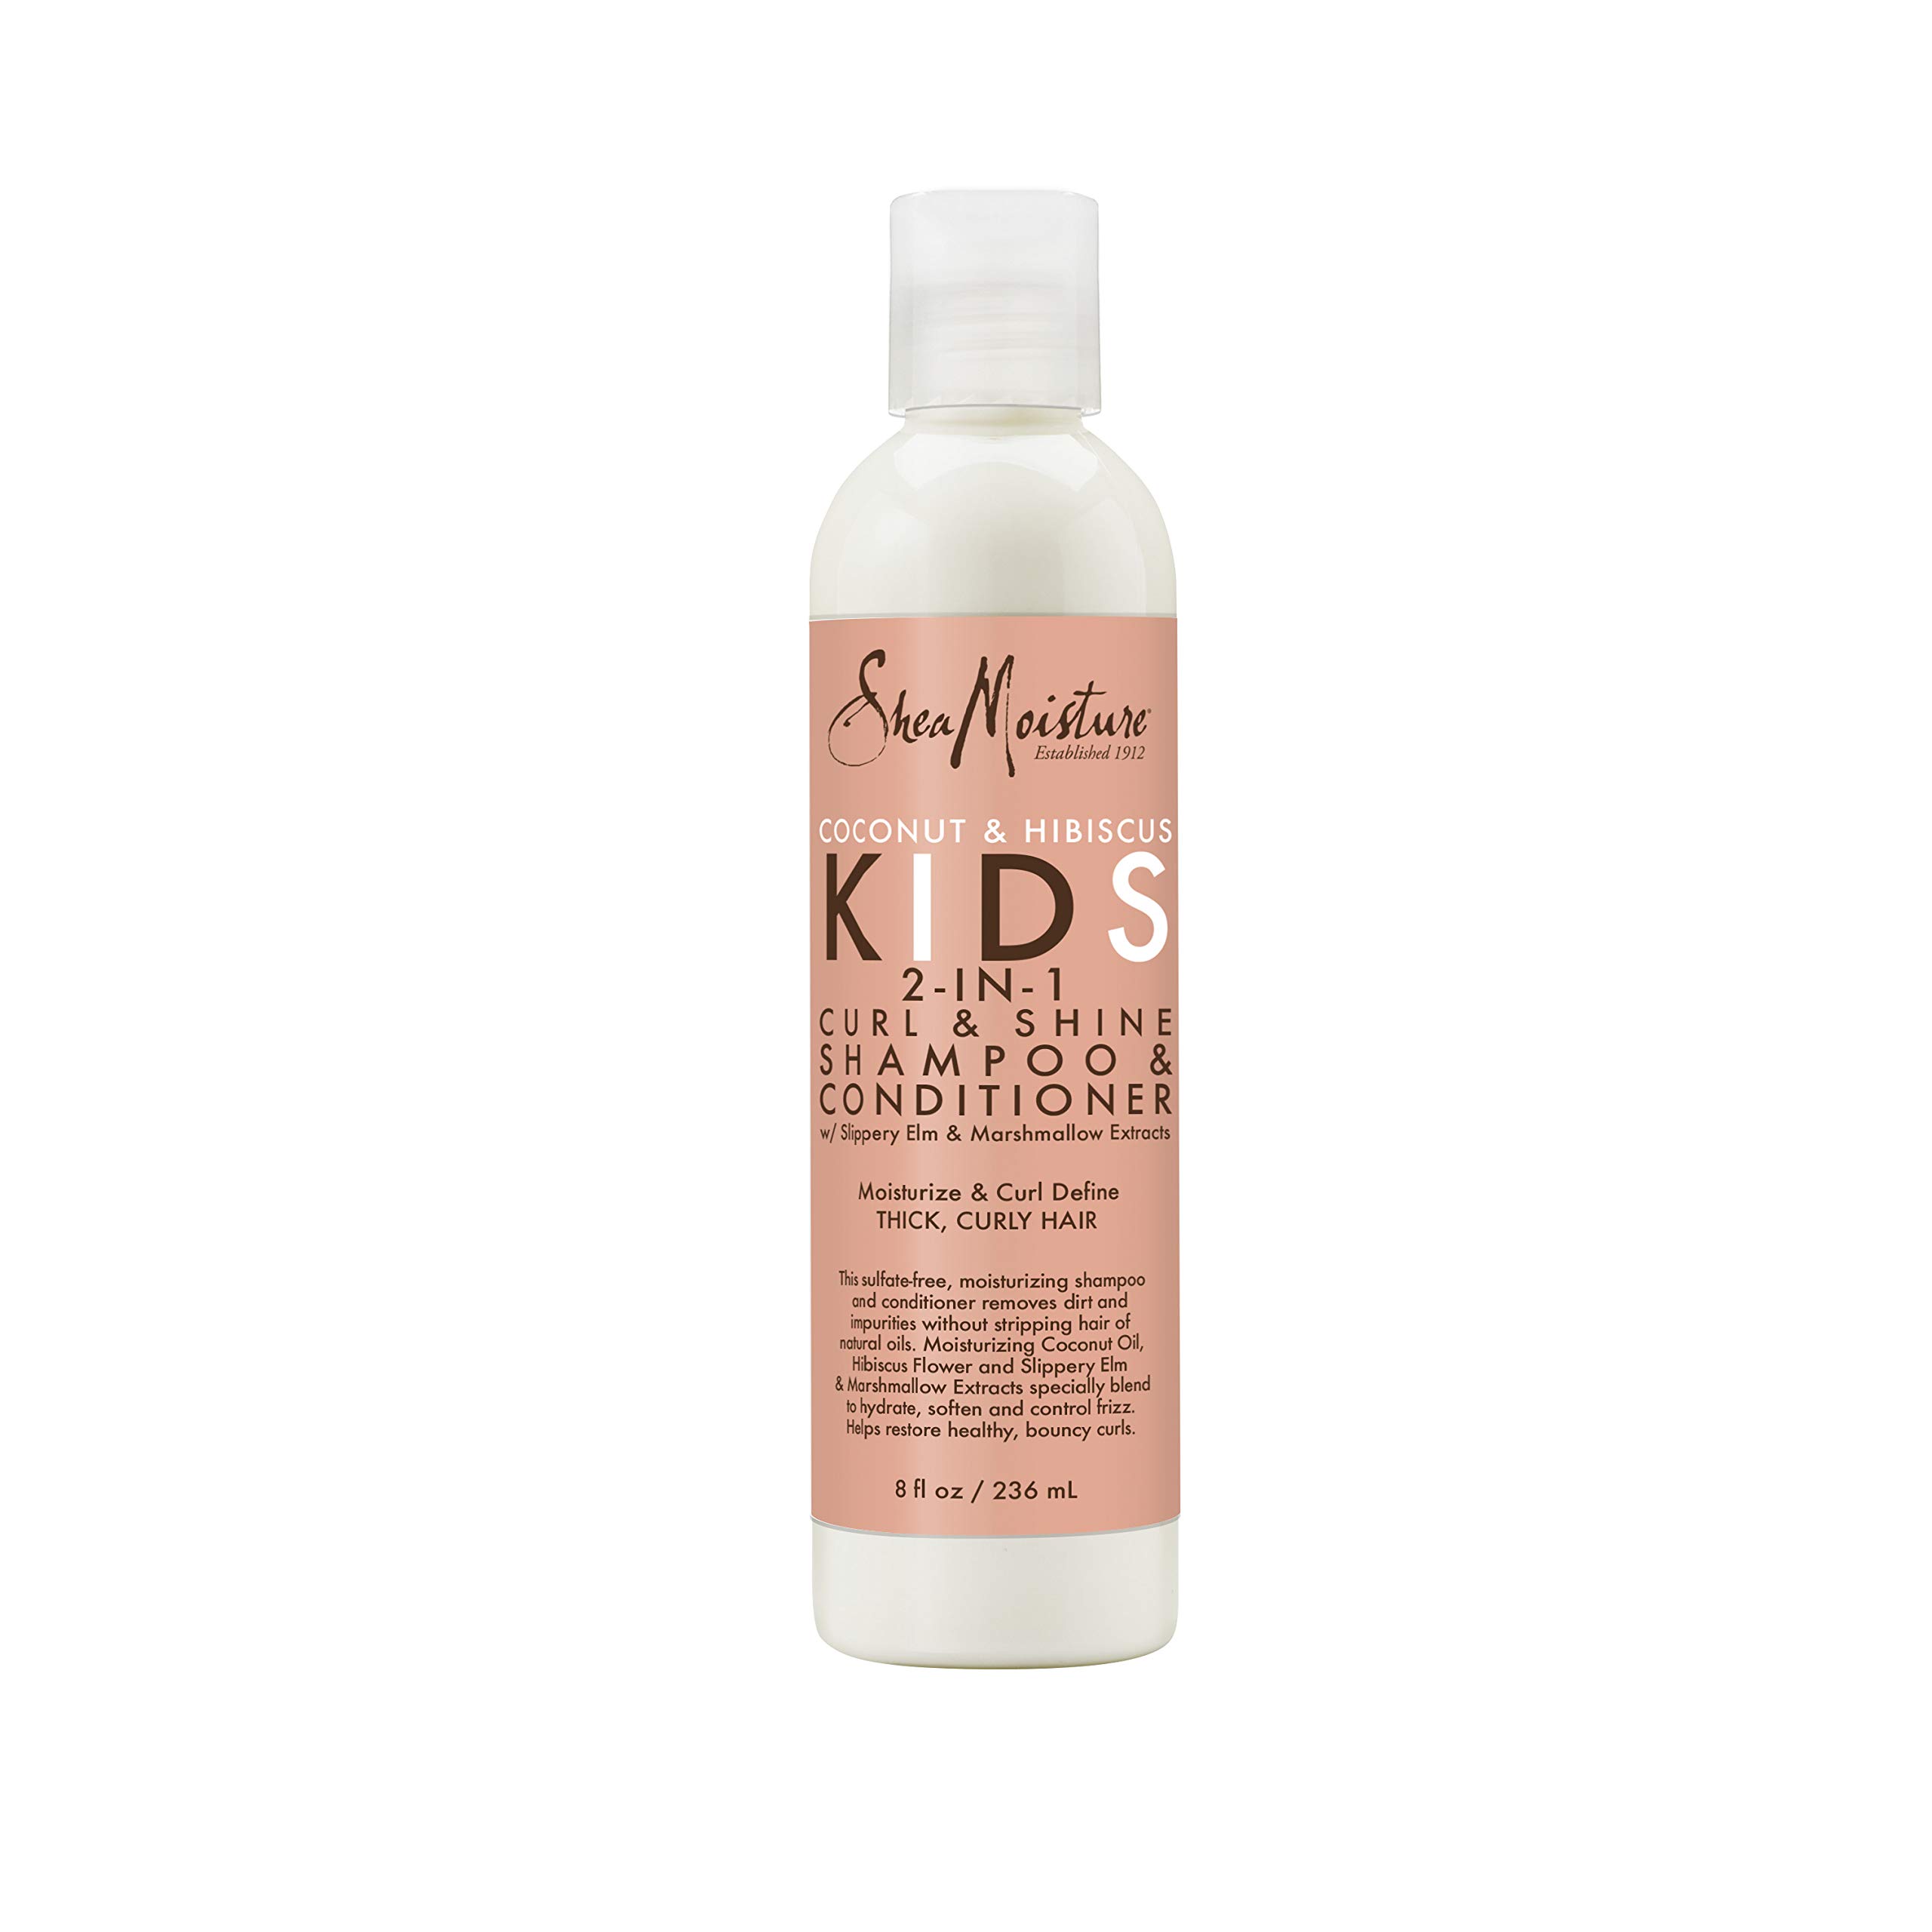 SheaMoisture Kids Moisturizing Detangler, 2-In-1 Shampoo & Conditioner, and Curling Coconut & Hibiscus 3 Count Curl & Shine For Curly Hair